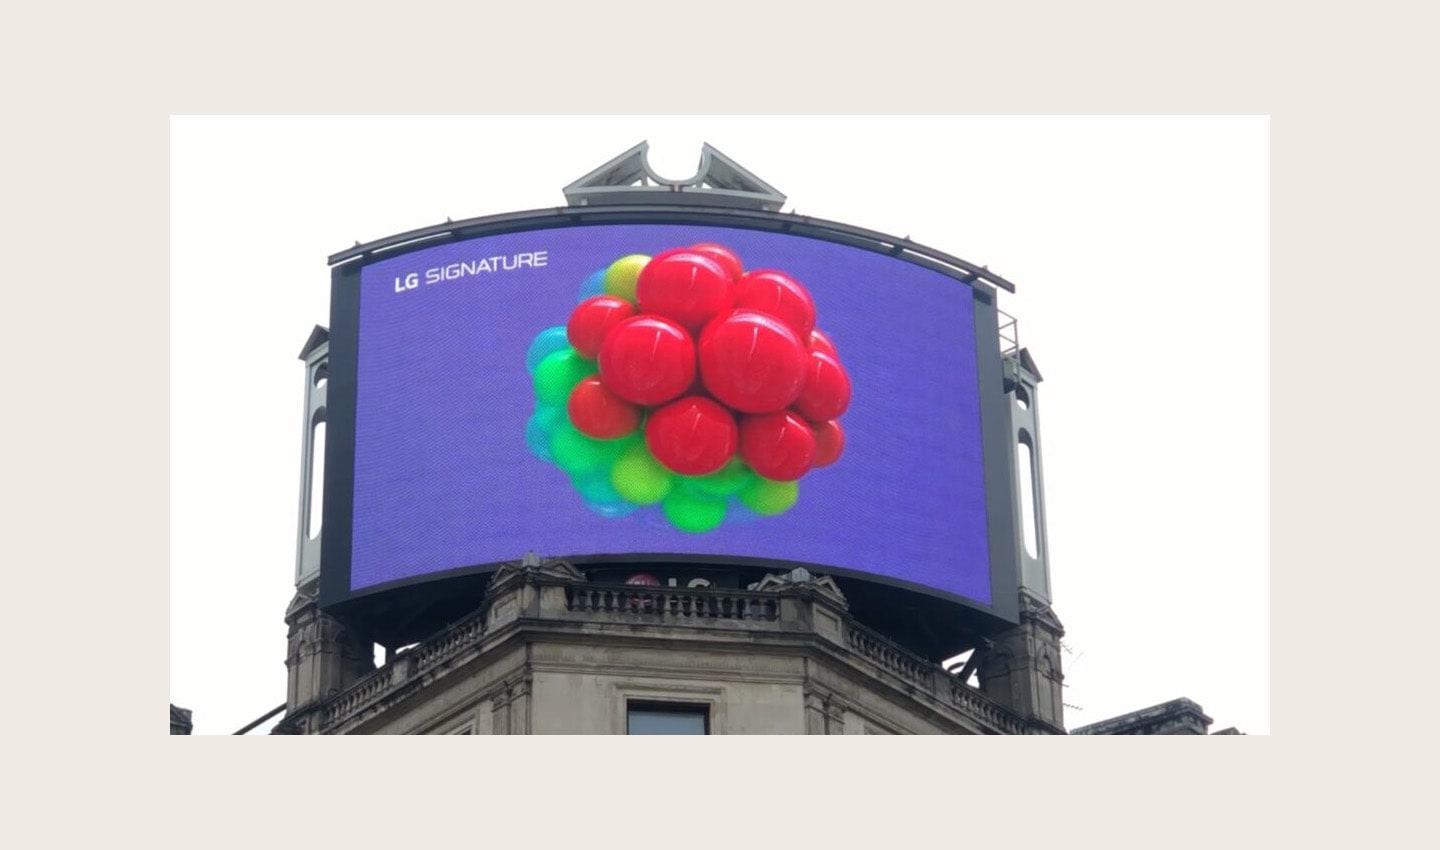 A close-up photo of LG's digital billboard in Piccadilly Circus, London with an animation representing LG SIGNATURE Wine Cellar